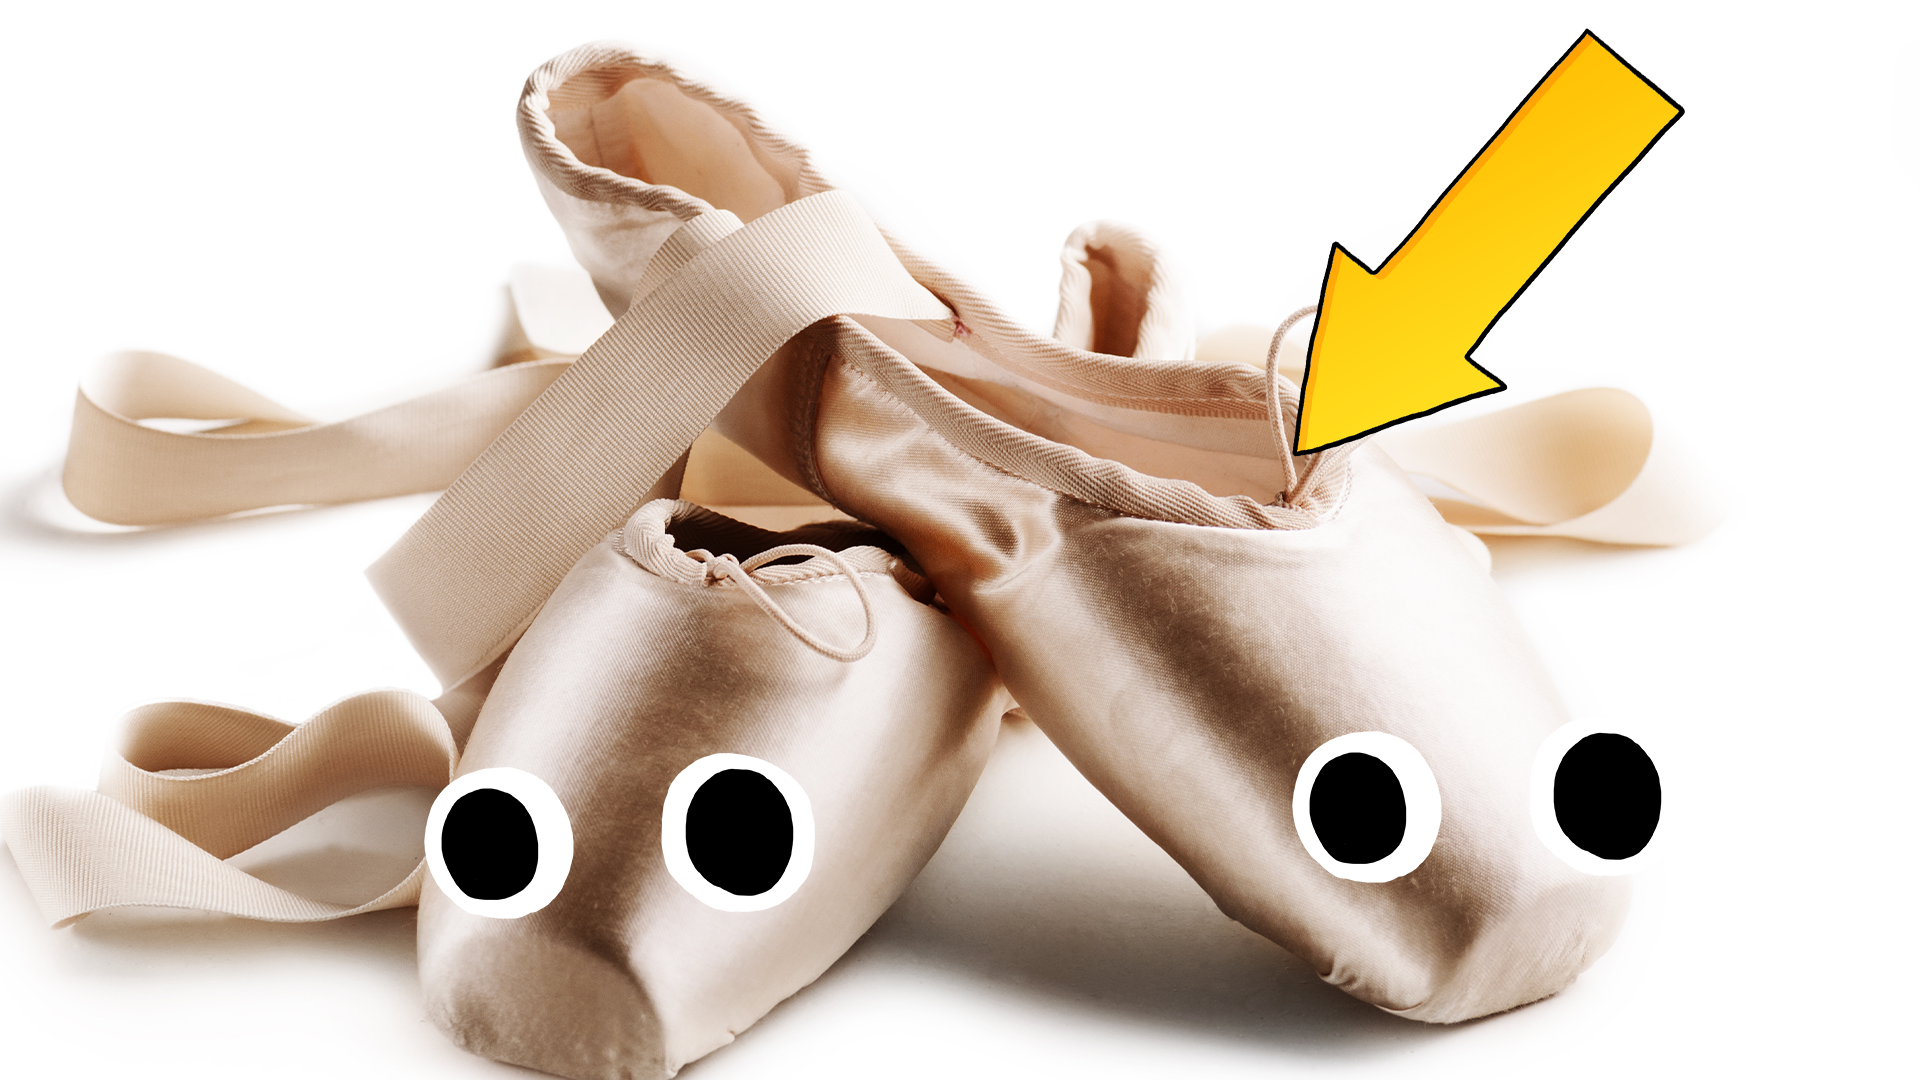 Ballet shoes with eyes